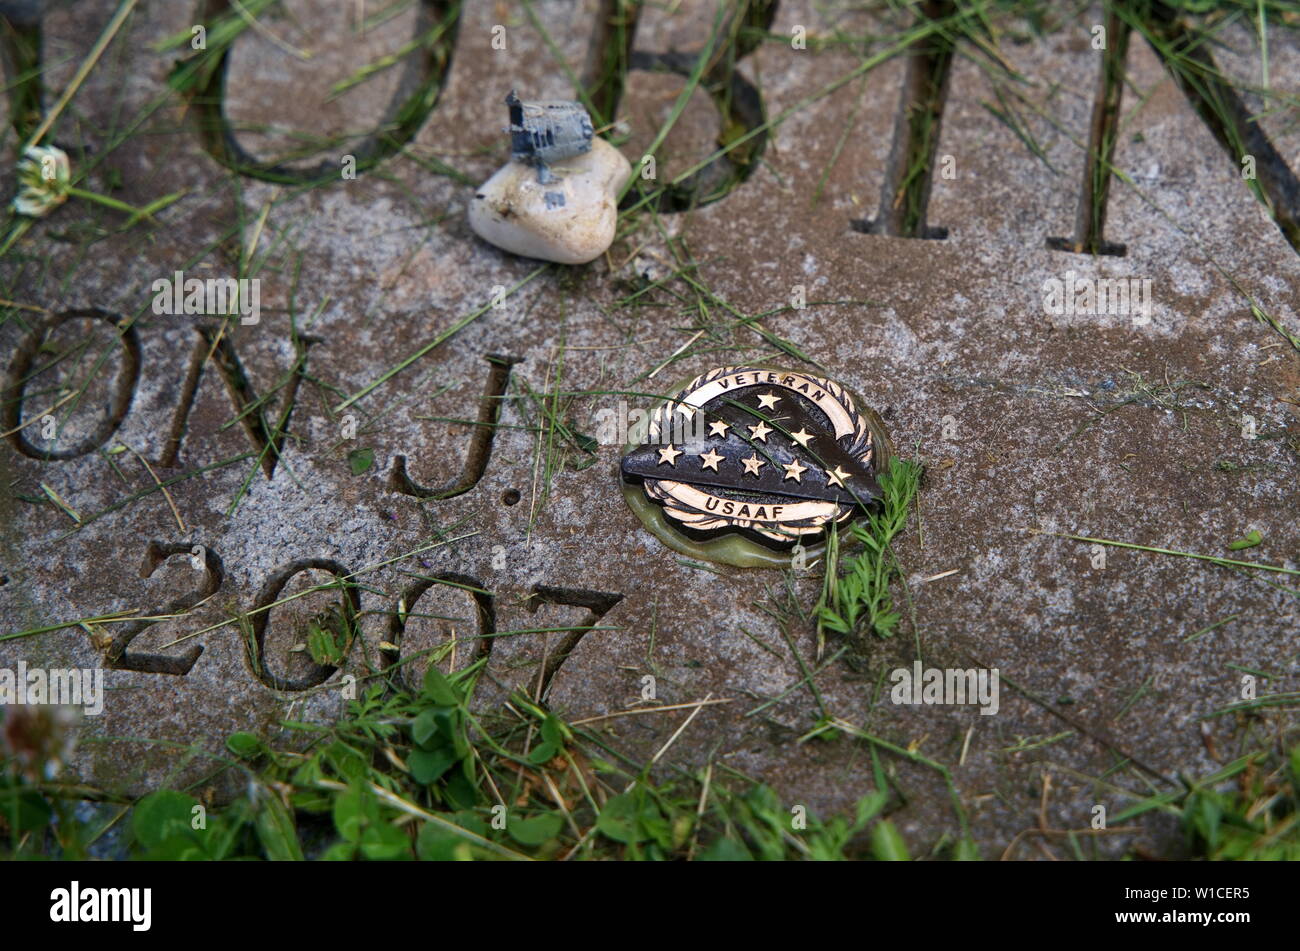 A USAAF or United States Army Air Forces pin glued to a World War II veterans grave marker. Stock Photo